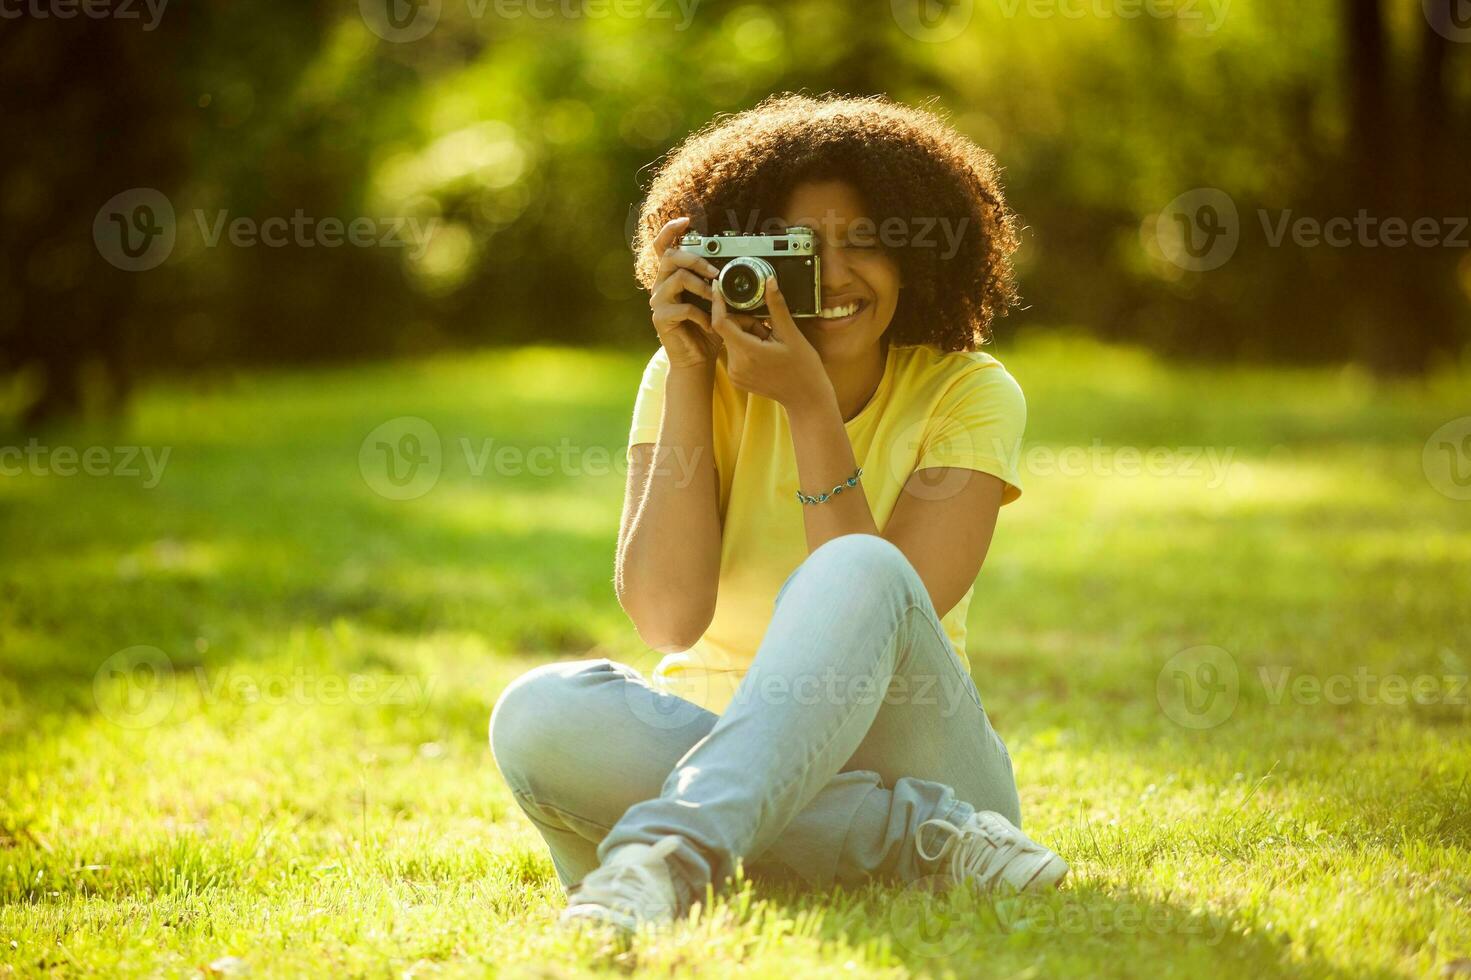 A woman who spends her time in nature photo